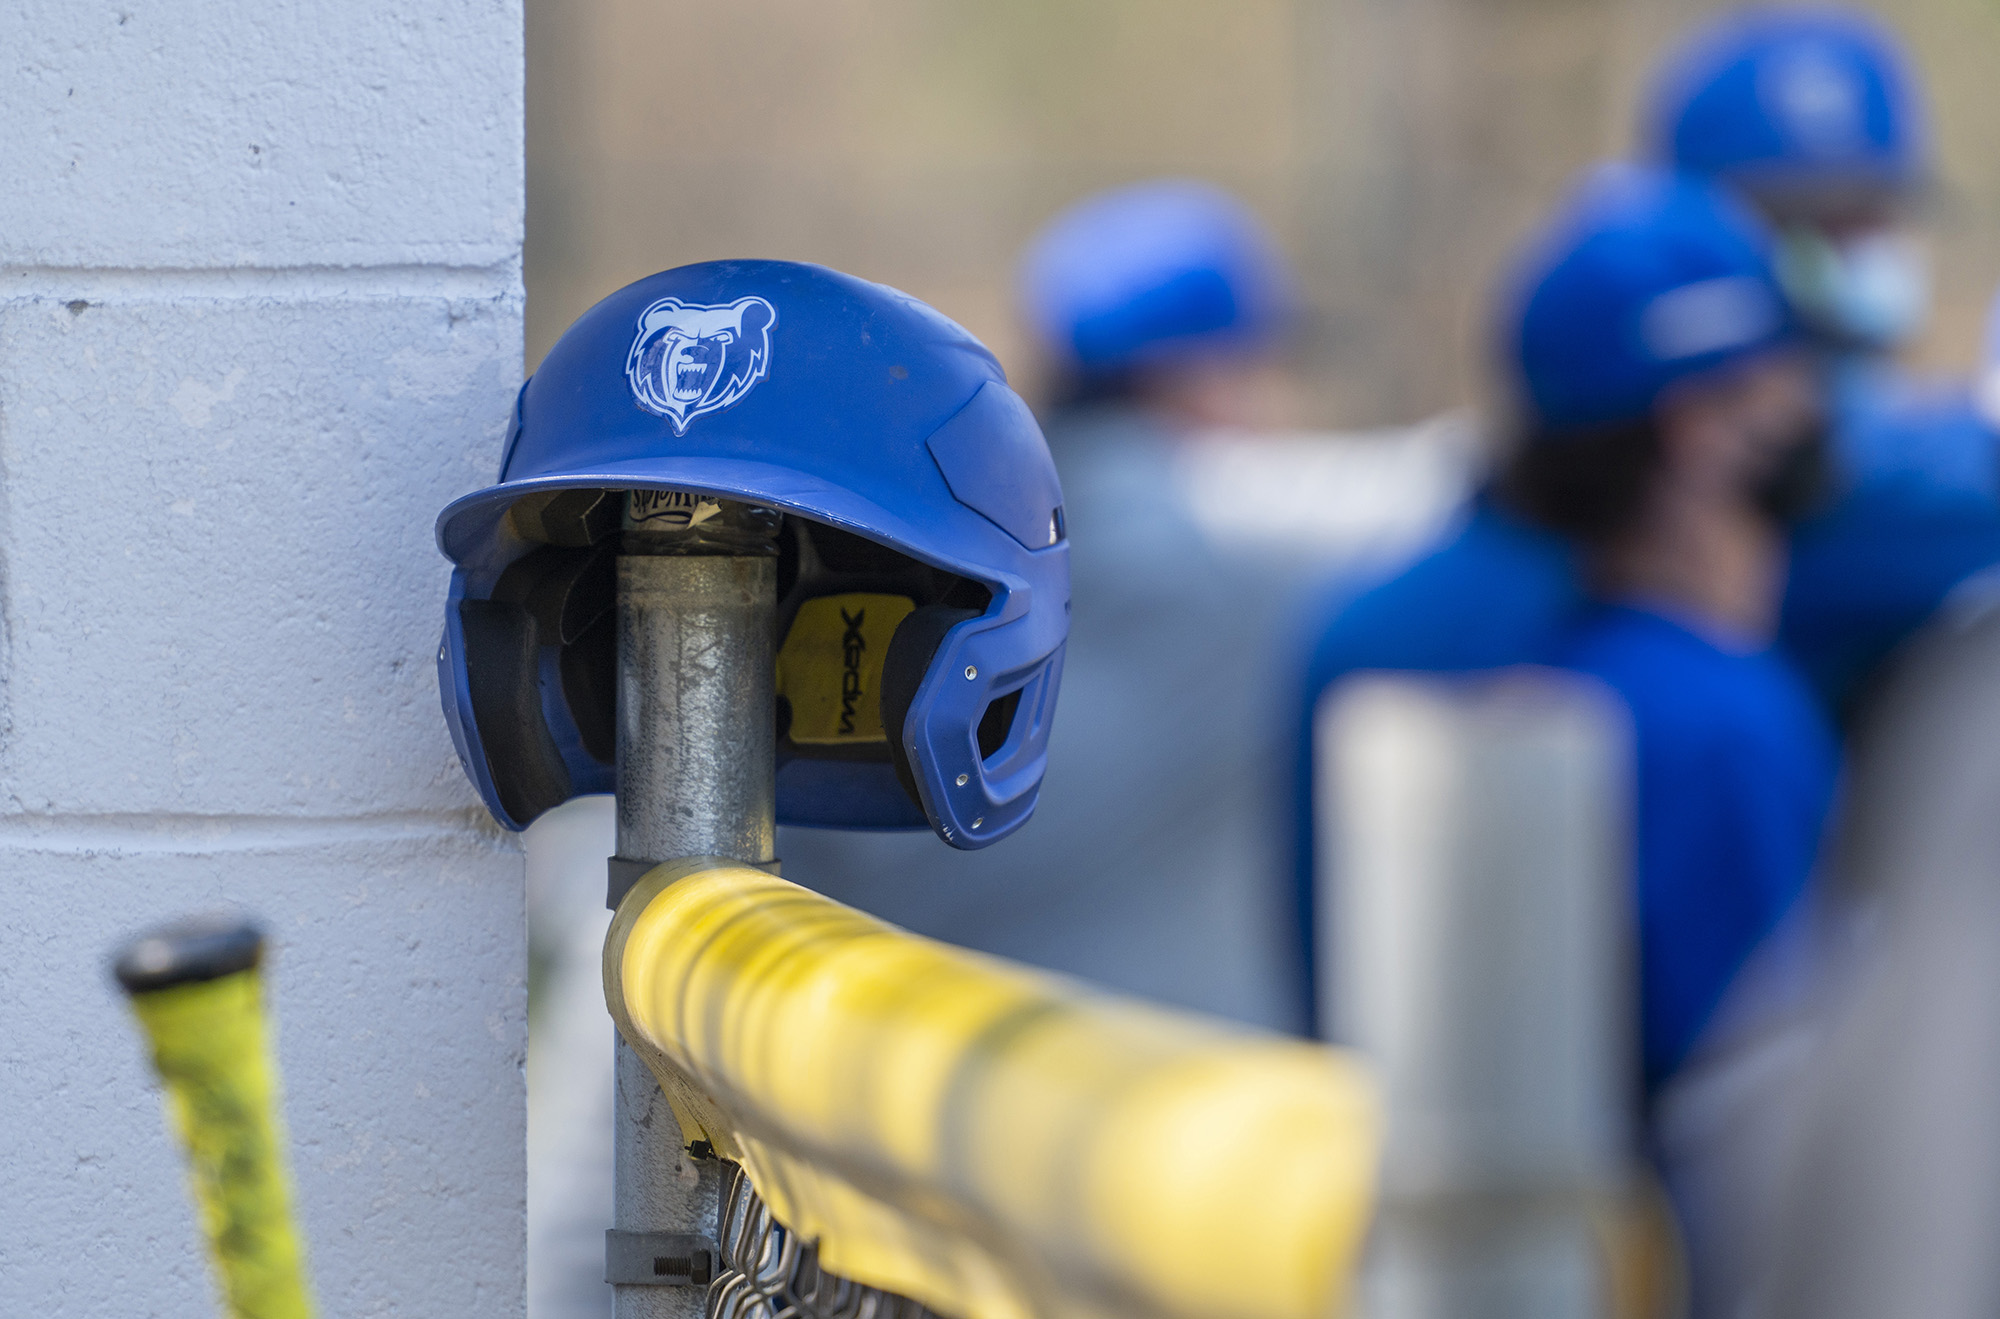 A batting helmet with the KCC Bruin head logo on it sits on a fence during a game.